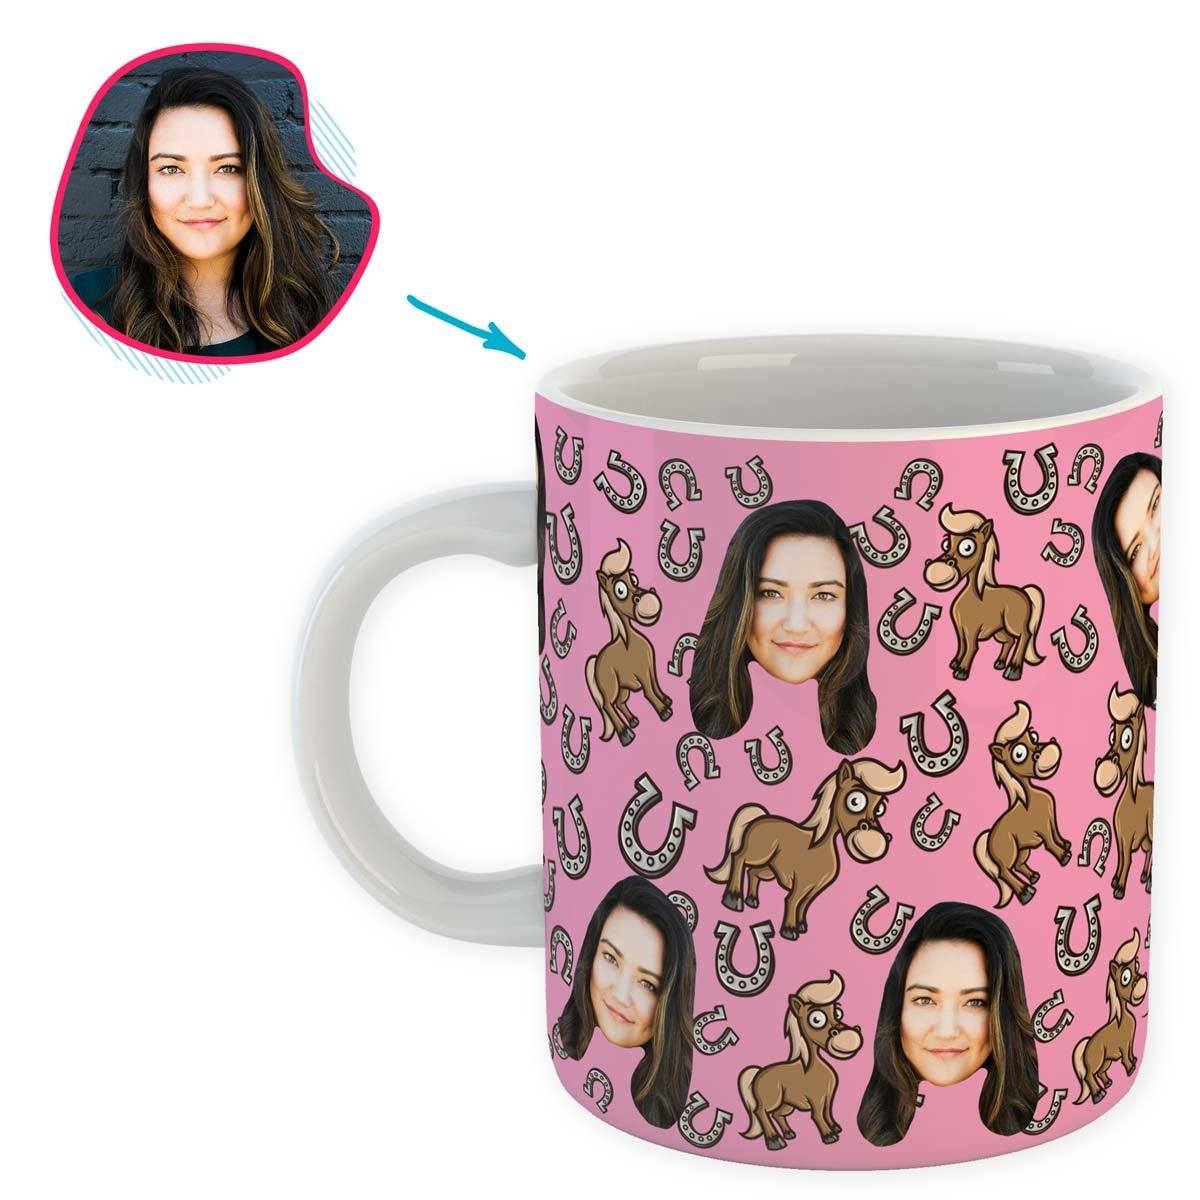 pink Horse mug personalized with photo of face printed on it